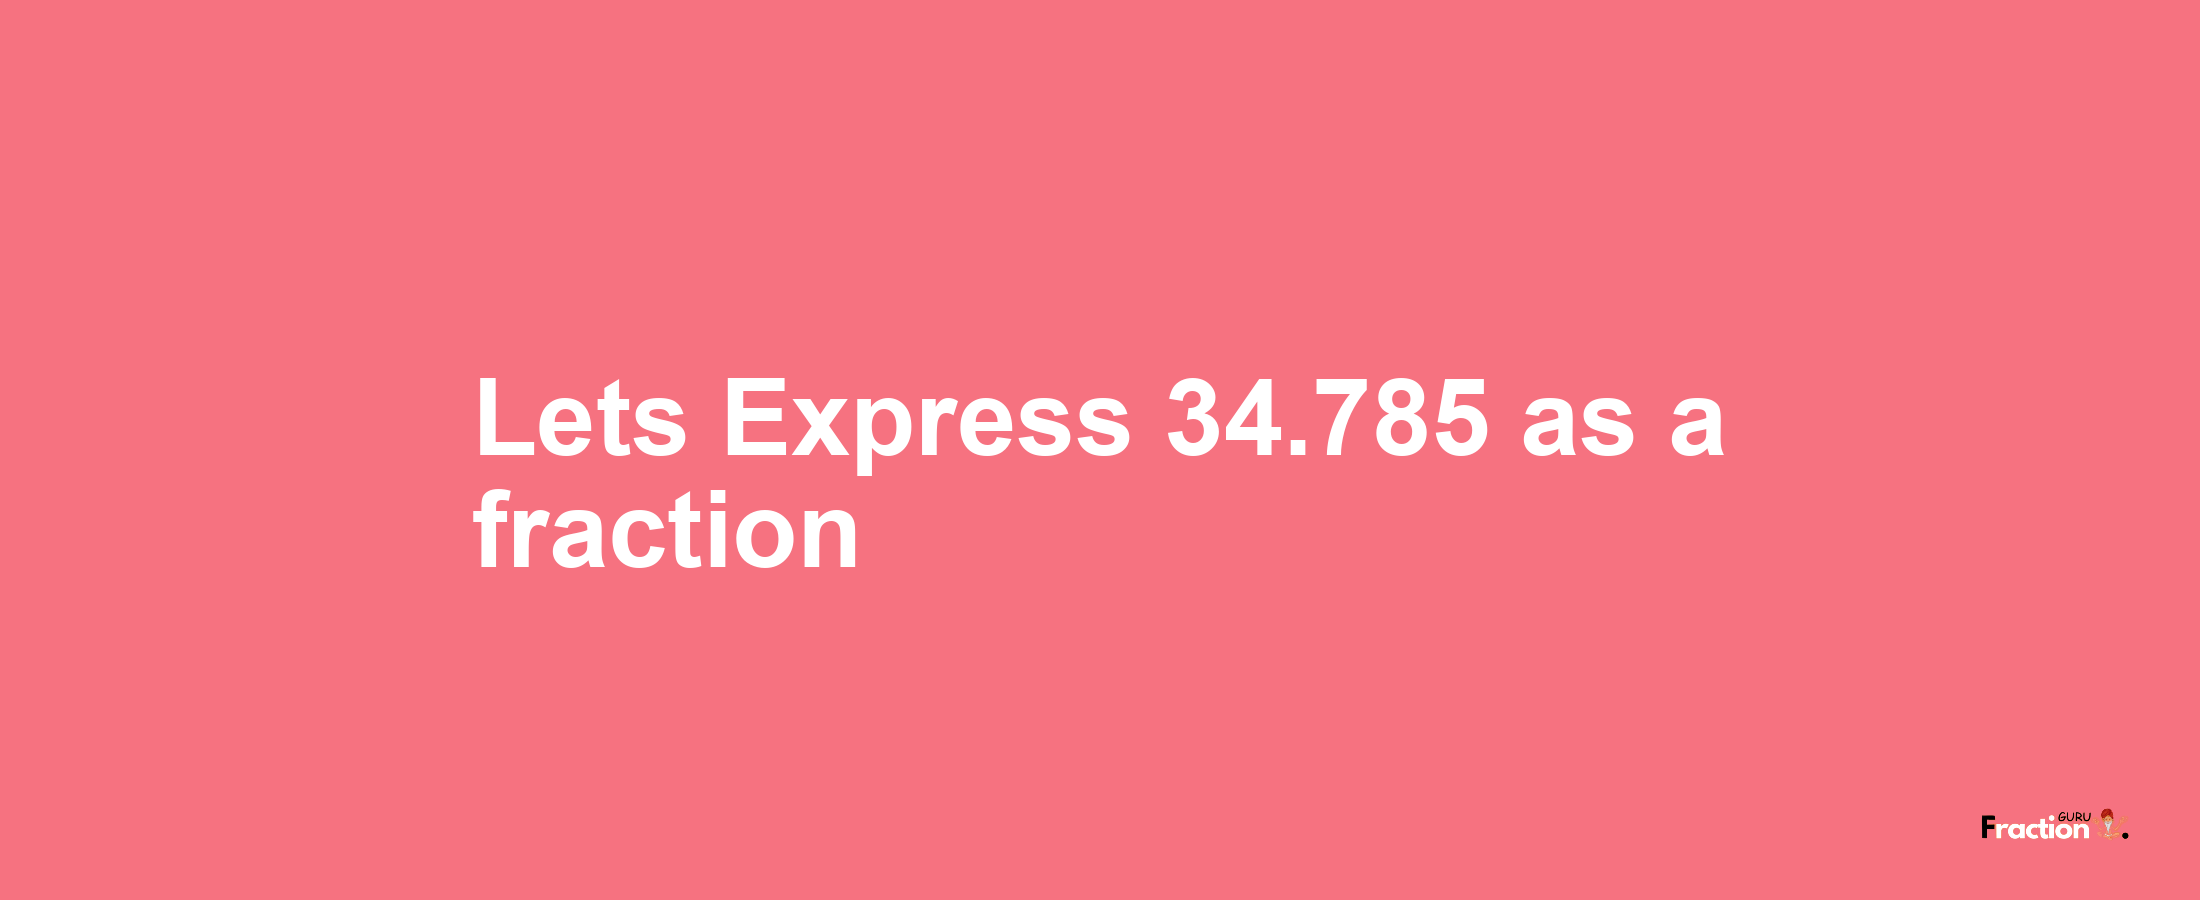 Lets Express 34.785 as afraction